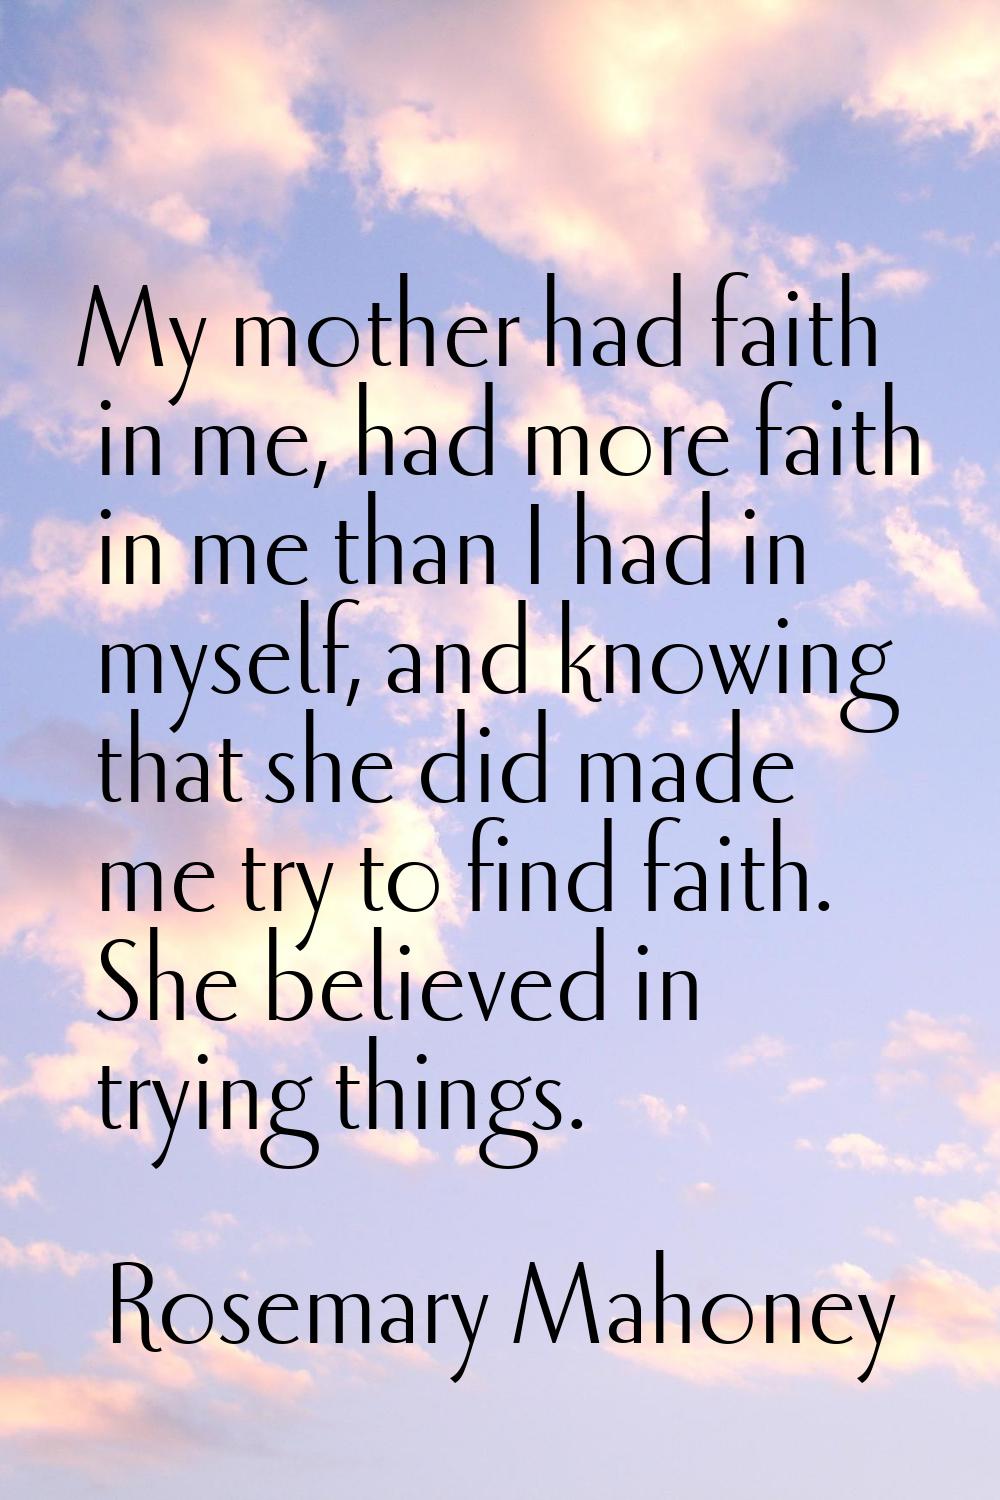 My mother had faith in me, had more faith in me than I had in myself, and knowing that she did made